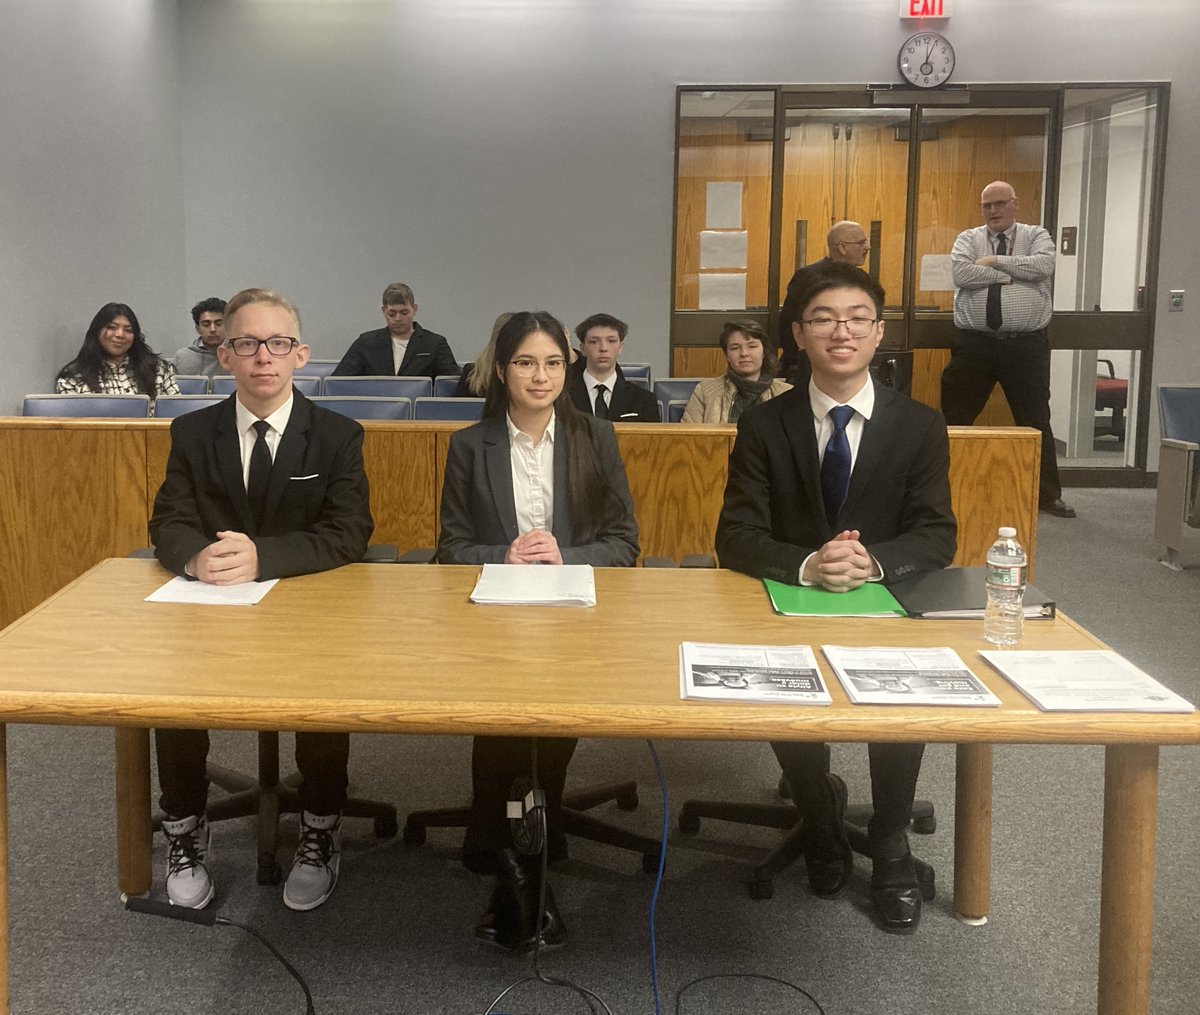 Our Seniors in the Academy of Finance Pathway competed in their final Mock Trial last week, although they didn't win this time around, they worked really hard and they had a great time competing! #WWHSWizards #WizardPride #WWHS #MockTrials